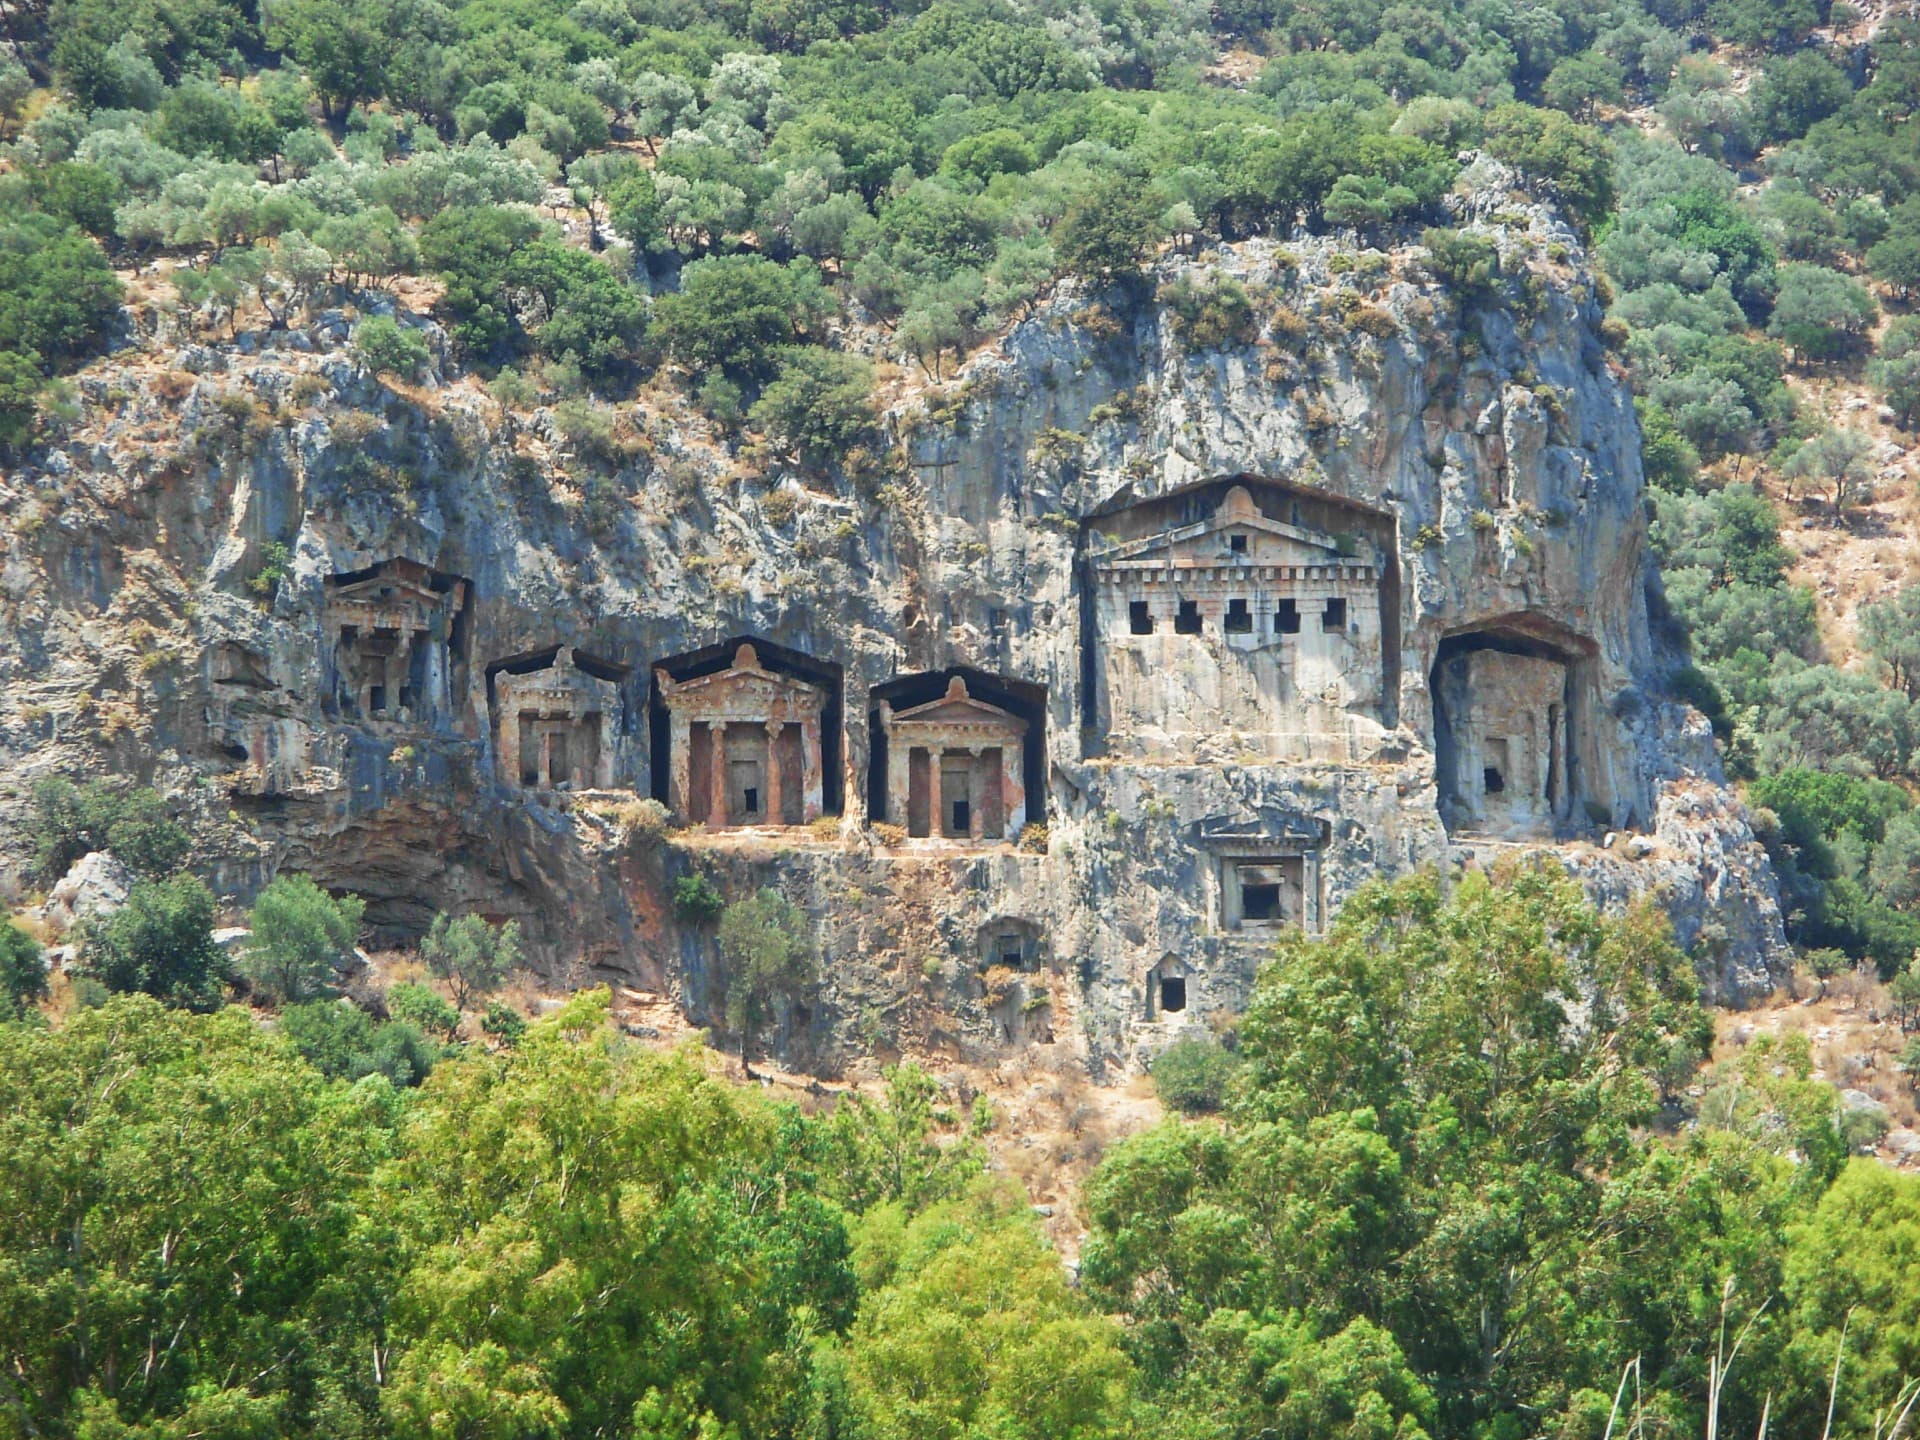 Lycian Rocks Tombs in Dalyan, Turkey - One of the most unique places to visit in Europe!